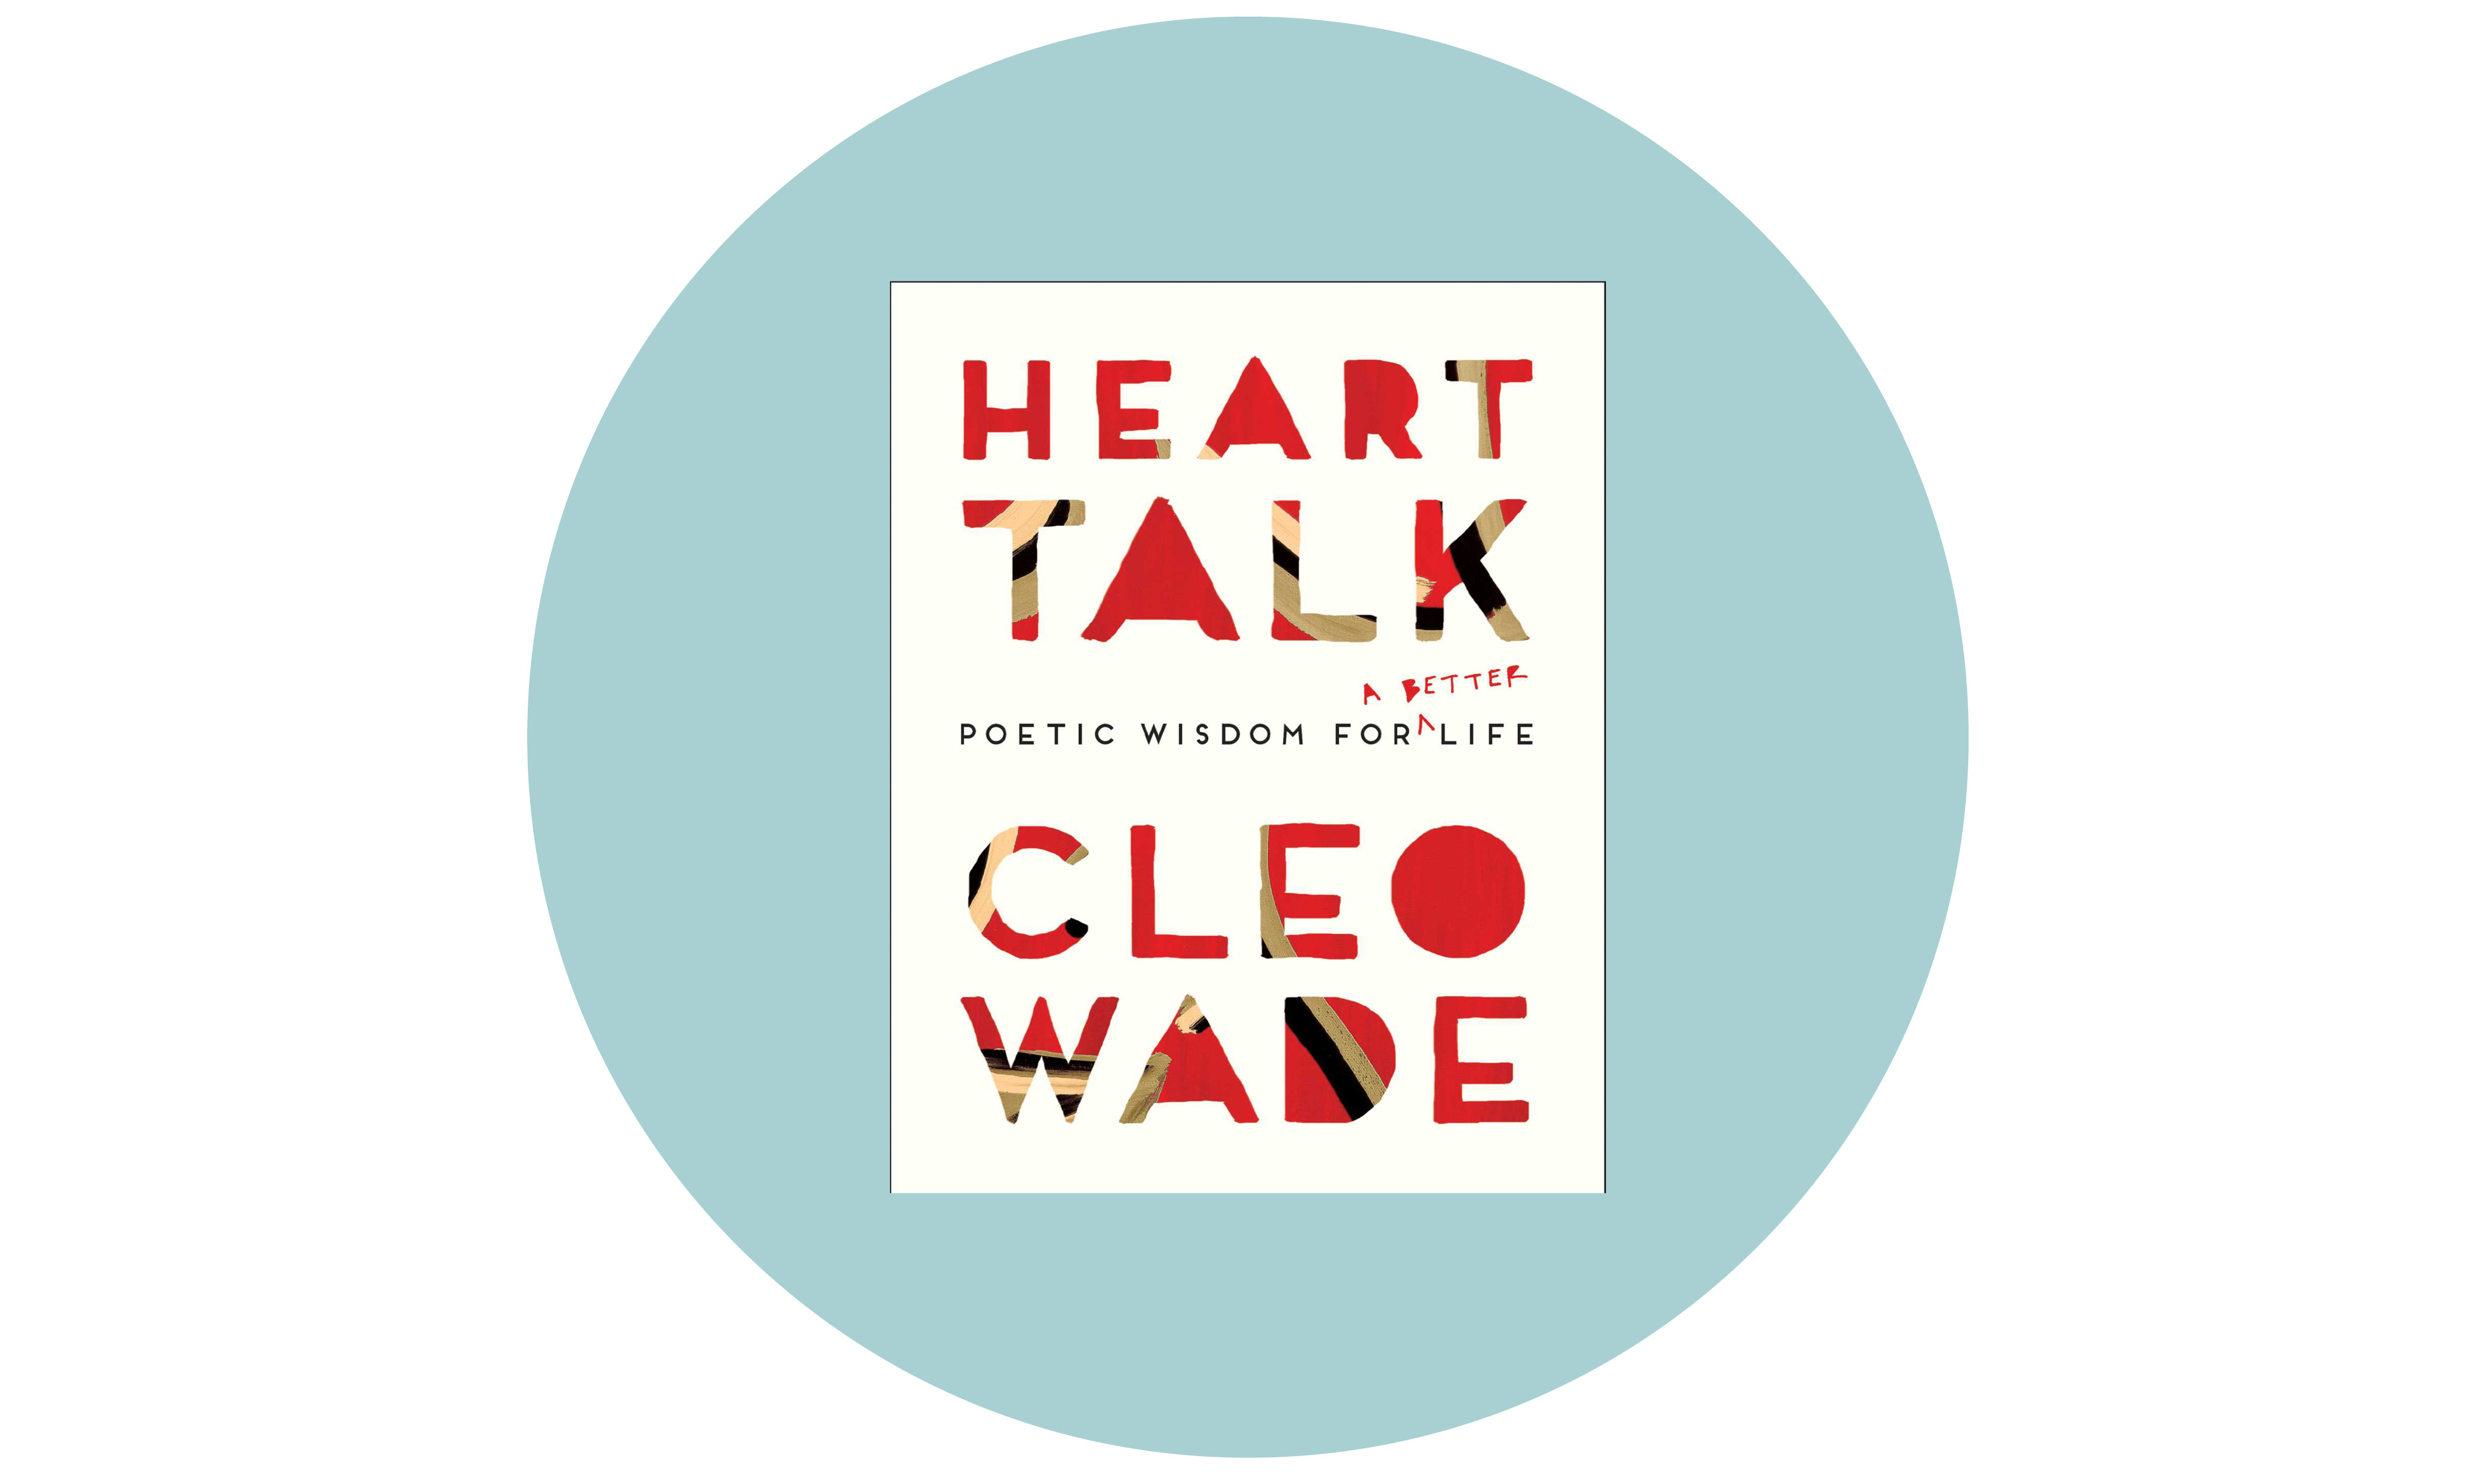 Heart Talk: Poetic Wisdom for a Better Life by Cleo Wade (Atria Books, 2018) Your saved folder on Instagram is full of her distinctive, block-letter affirmations, now author and activist Cleo Wade (named ‘the millennial Oprah’ by The Cut) has written a book of pep-talking poetry that answers the question: “How do I take care of myself when everything feels crazy and the news is traumatising every day?” Like a literary hug that’s always there when you need it most, consider Heart Talk a crucial element of your self-care toolkit — a big bowl of pasta being another.